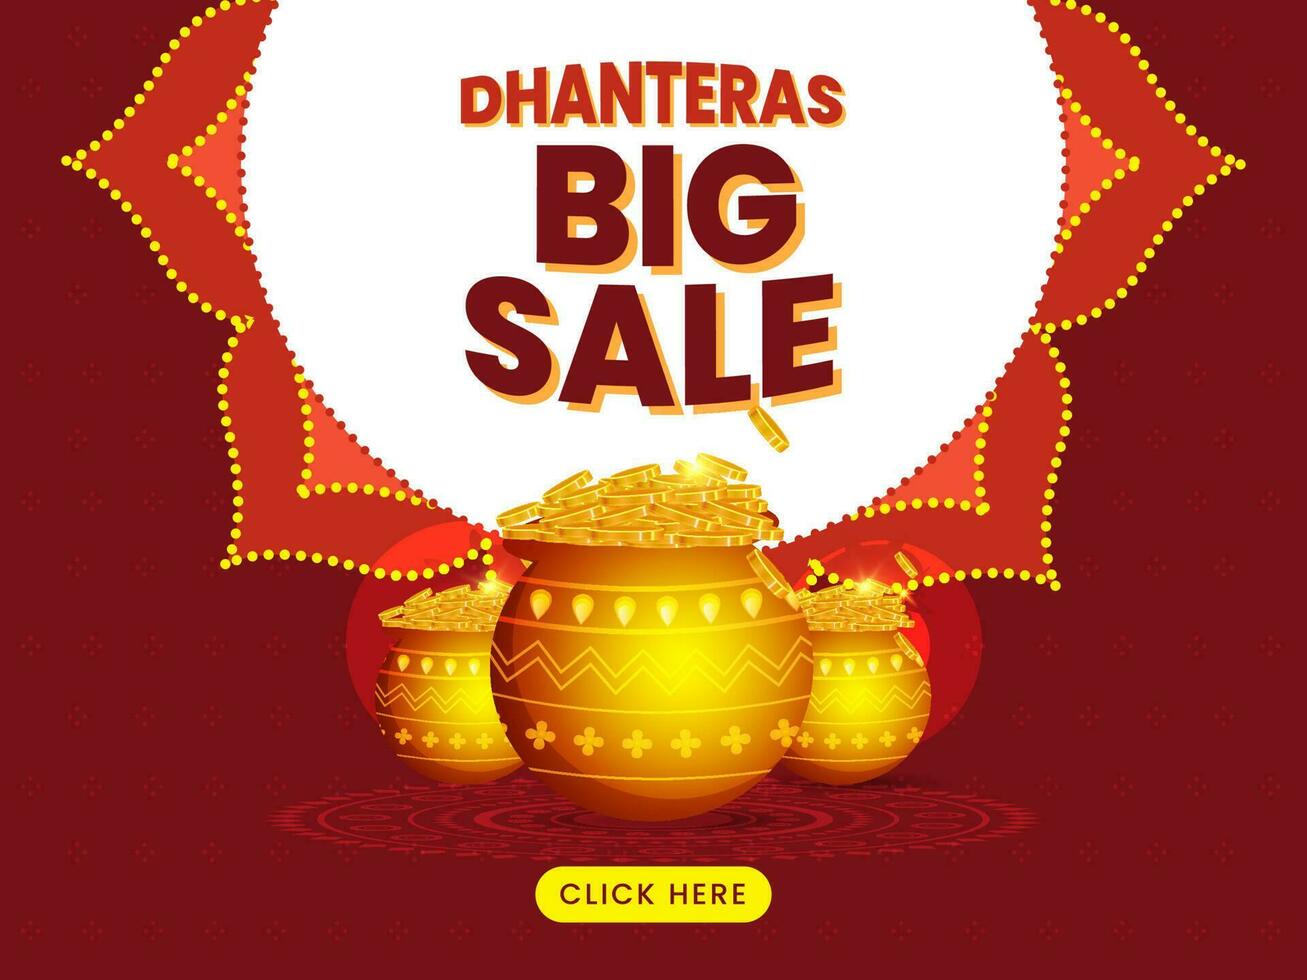 Dhanteras Big Sale Poster Design With Gold Coin Pots On Red Mandala Pattern Background. vector